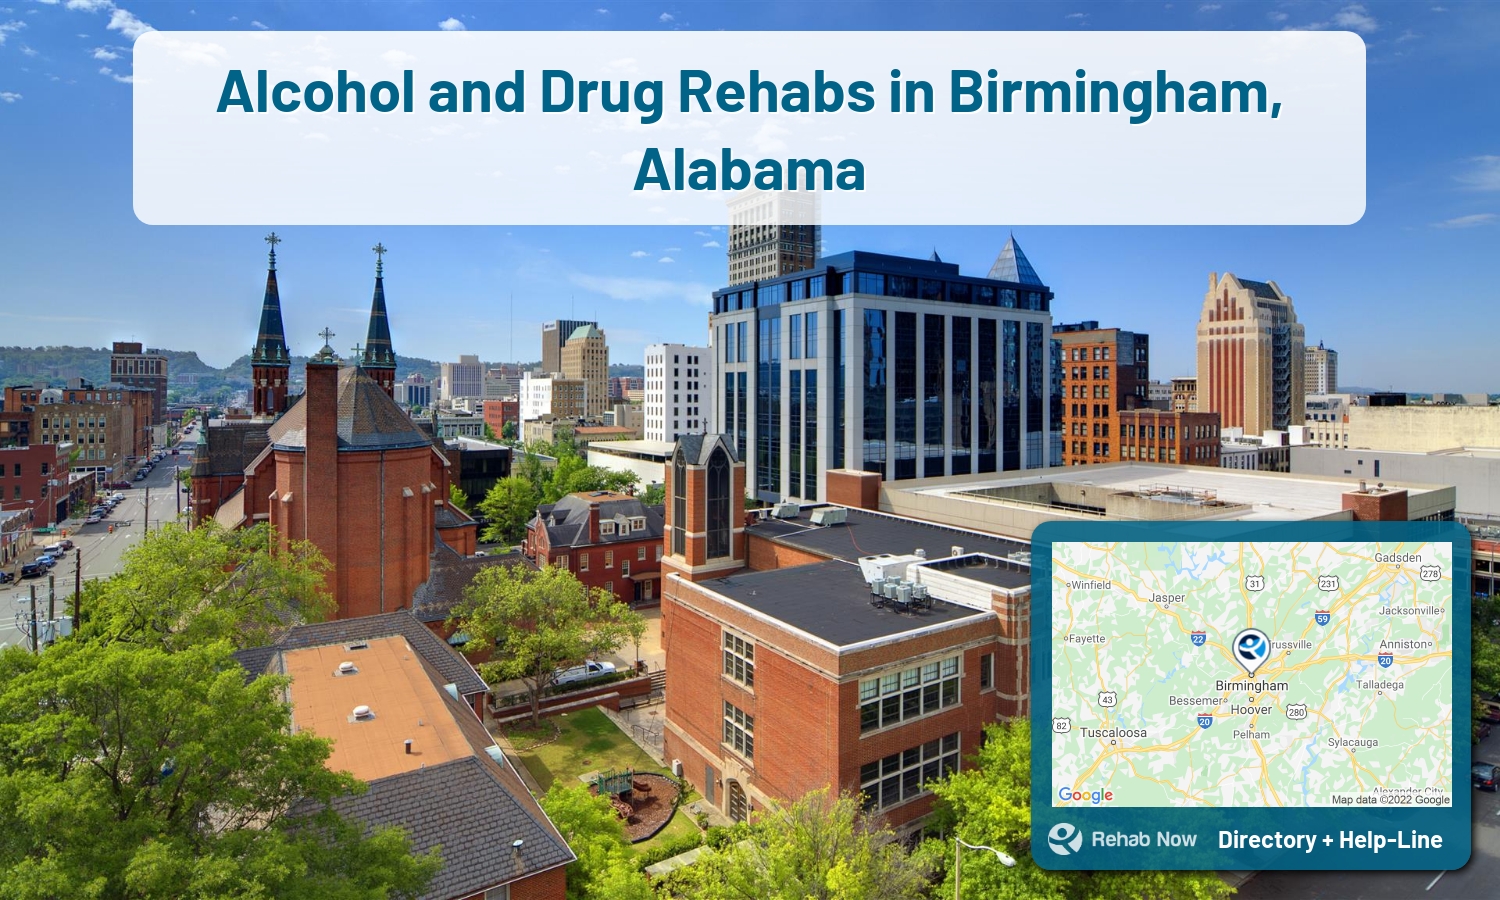 View options, availability, treatment methods, and more, for drug rehab and alcohol treatment in Birmingham, Alabama